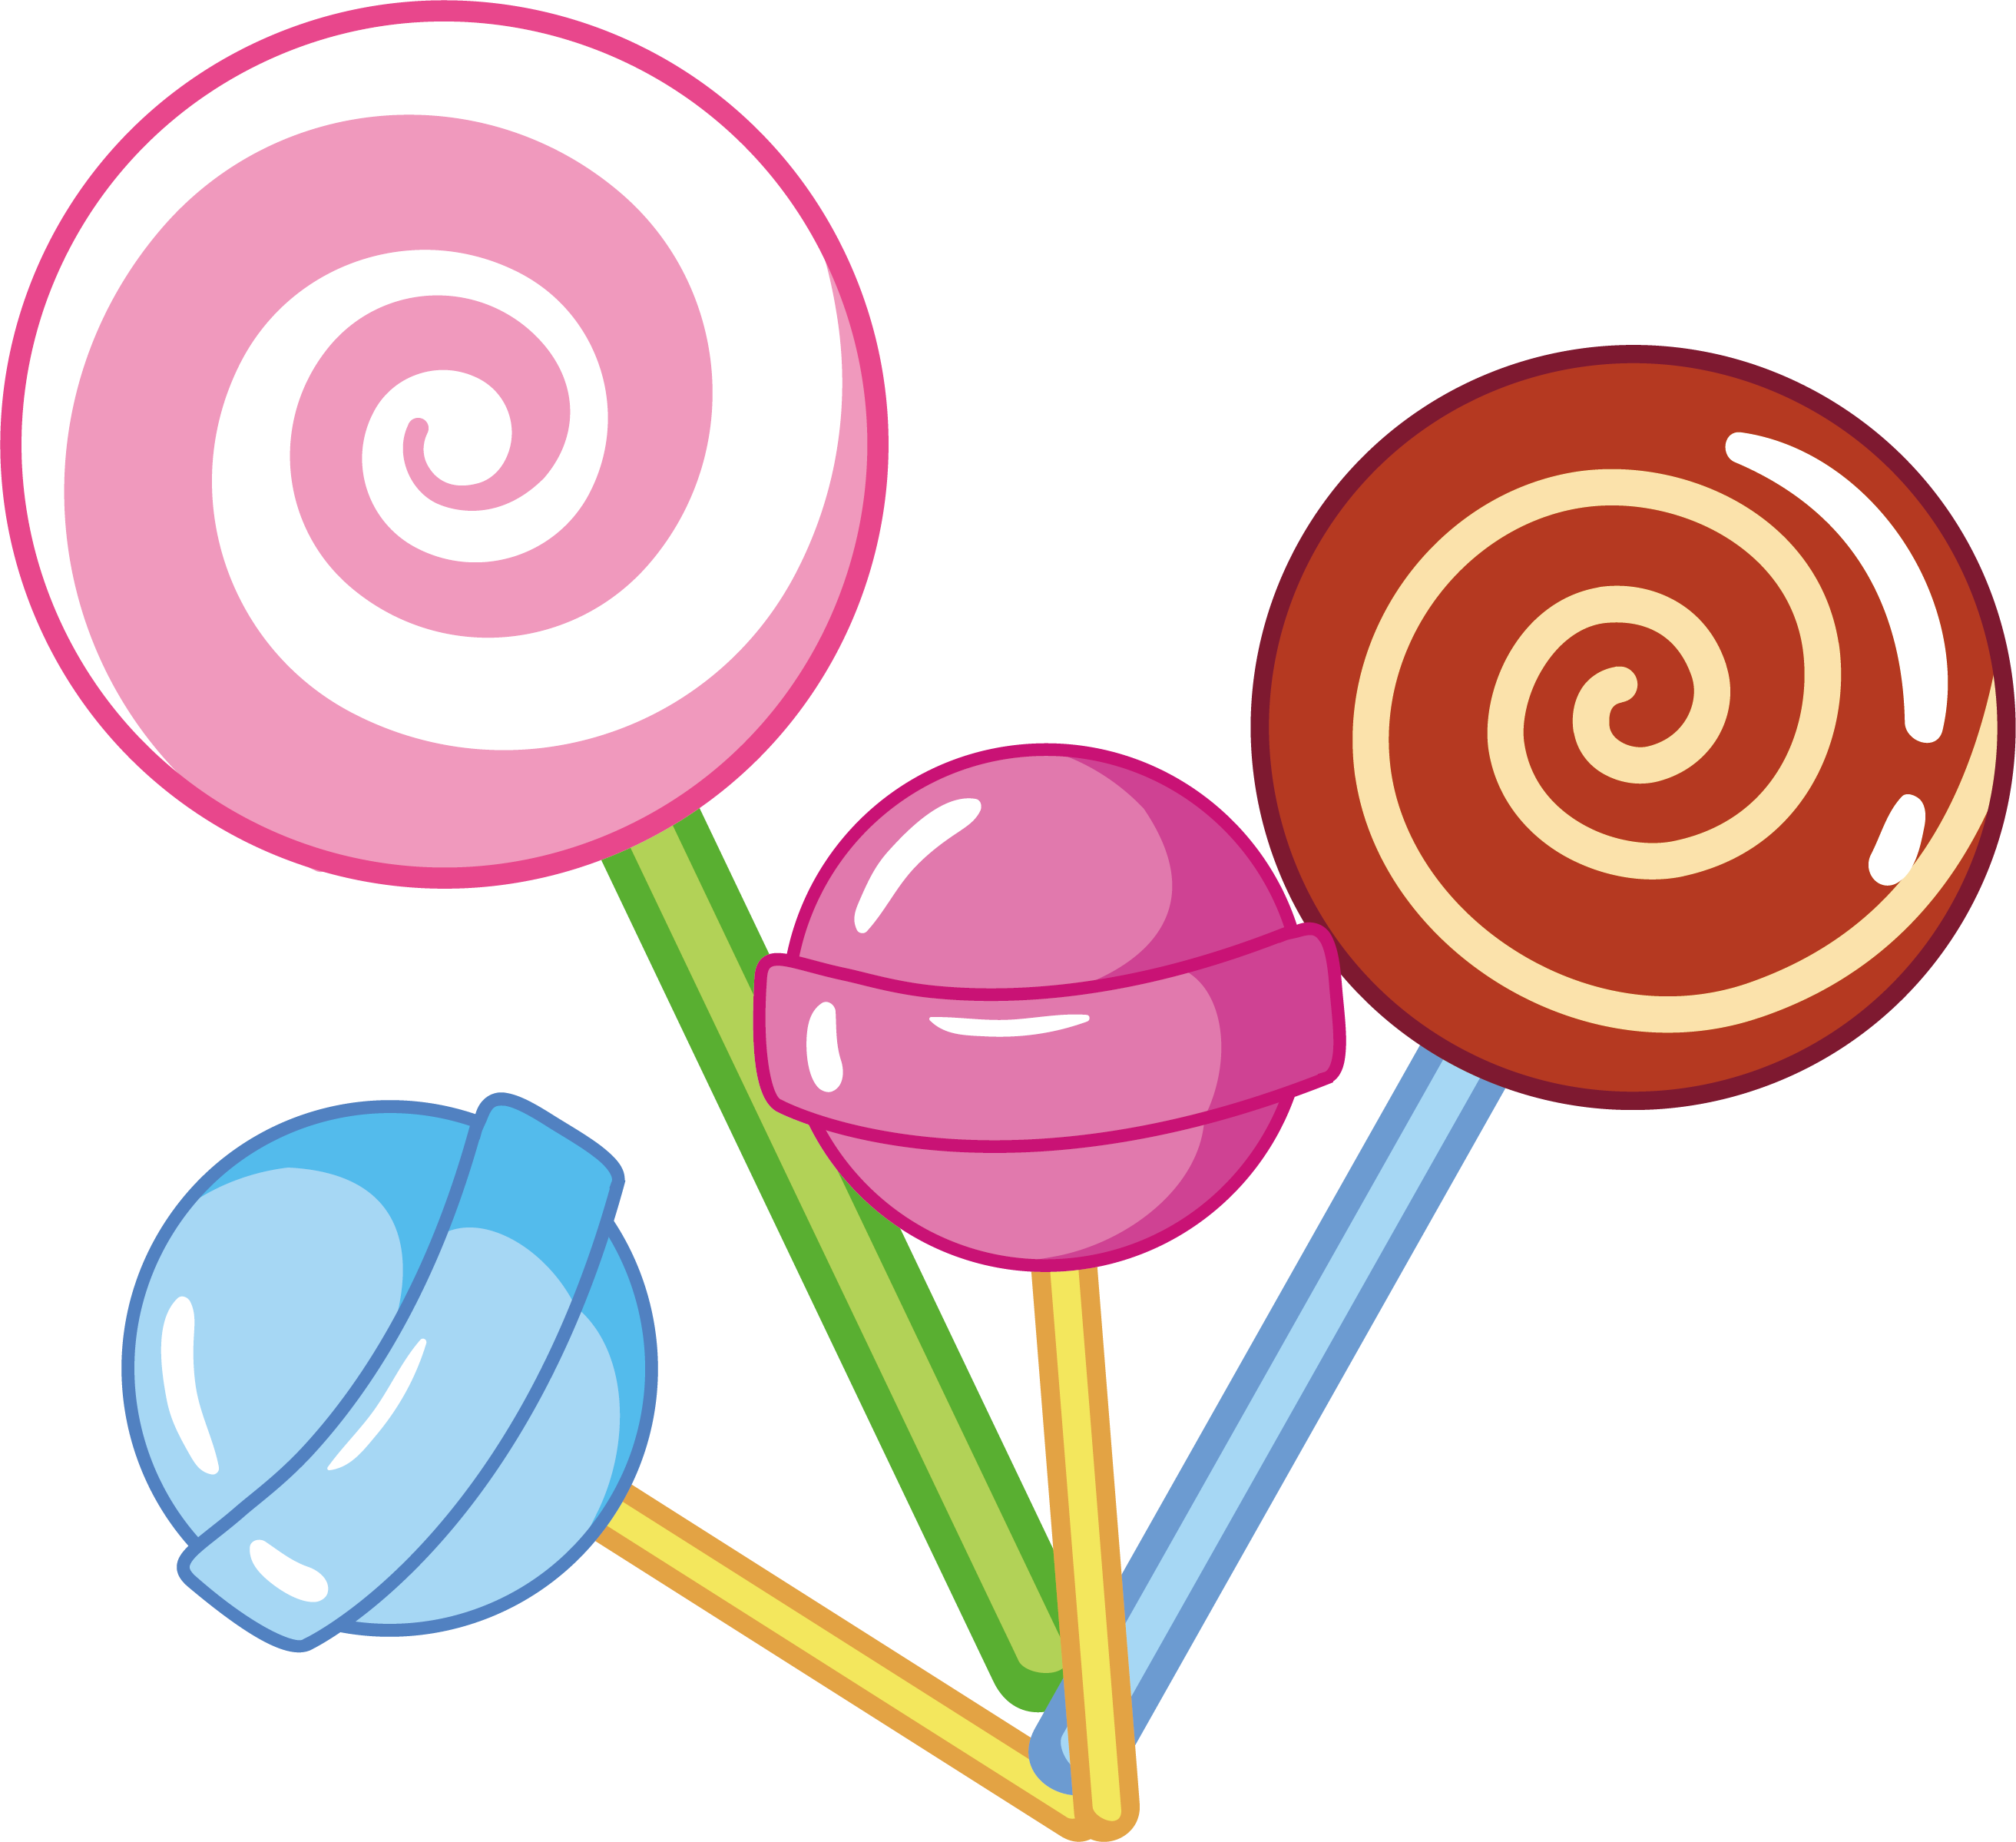 0 Result Images of Caricatura Candy Candy Png - PNG Image Collection